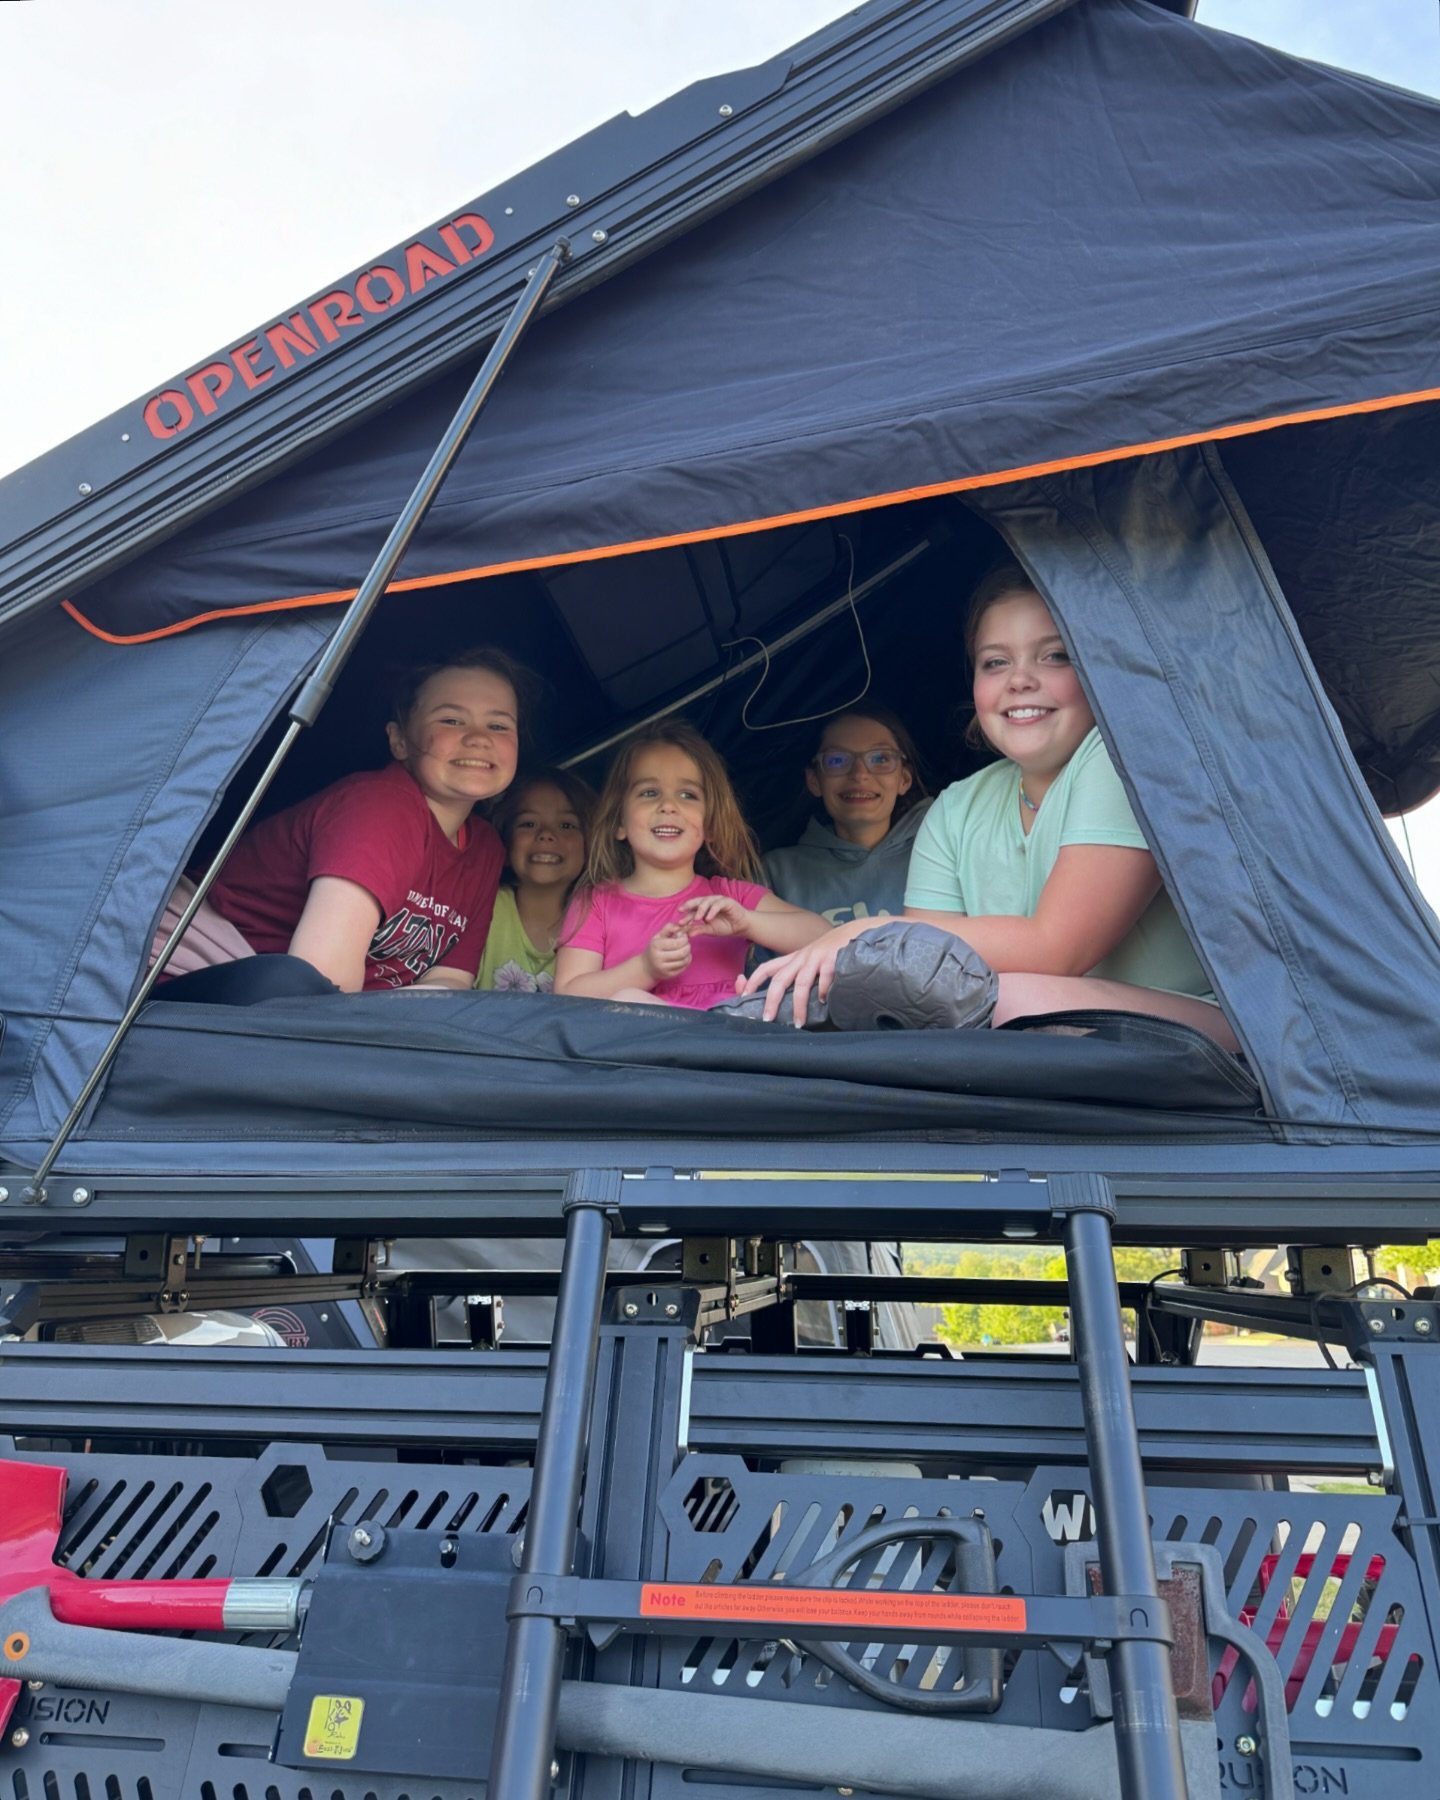 When you find all the neighborhood kids in your tent&hellip;